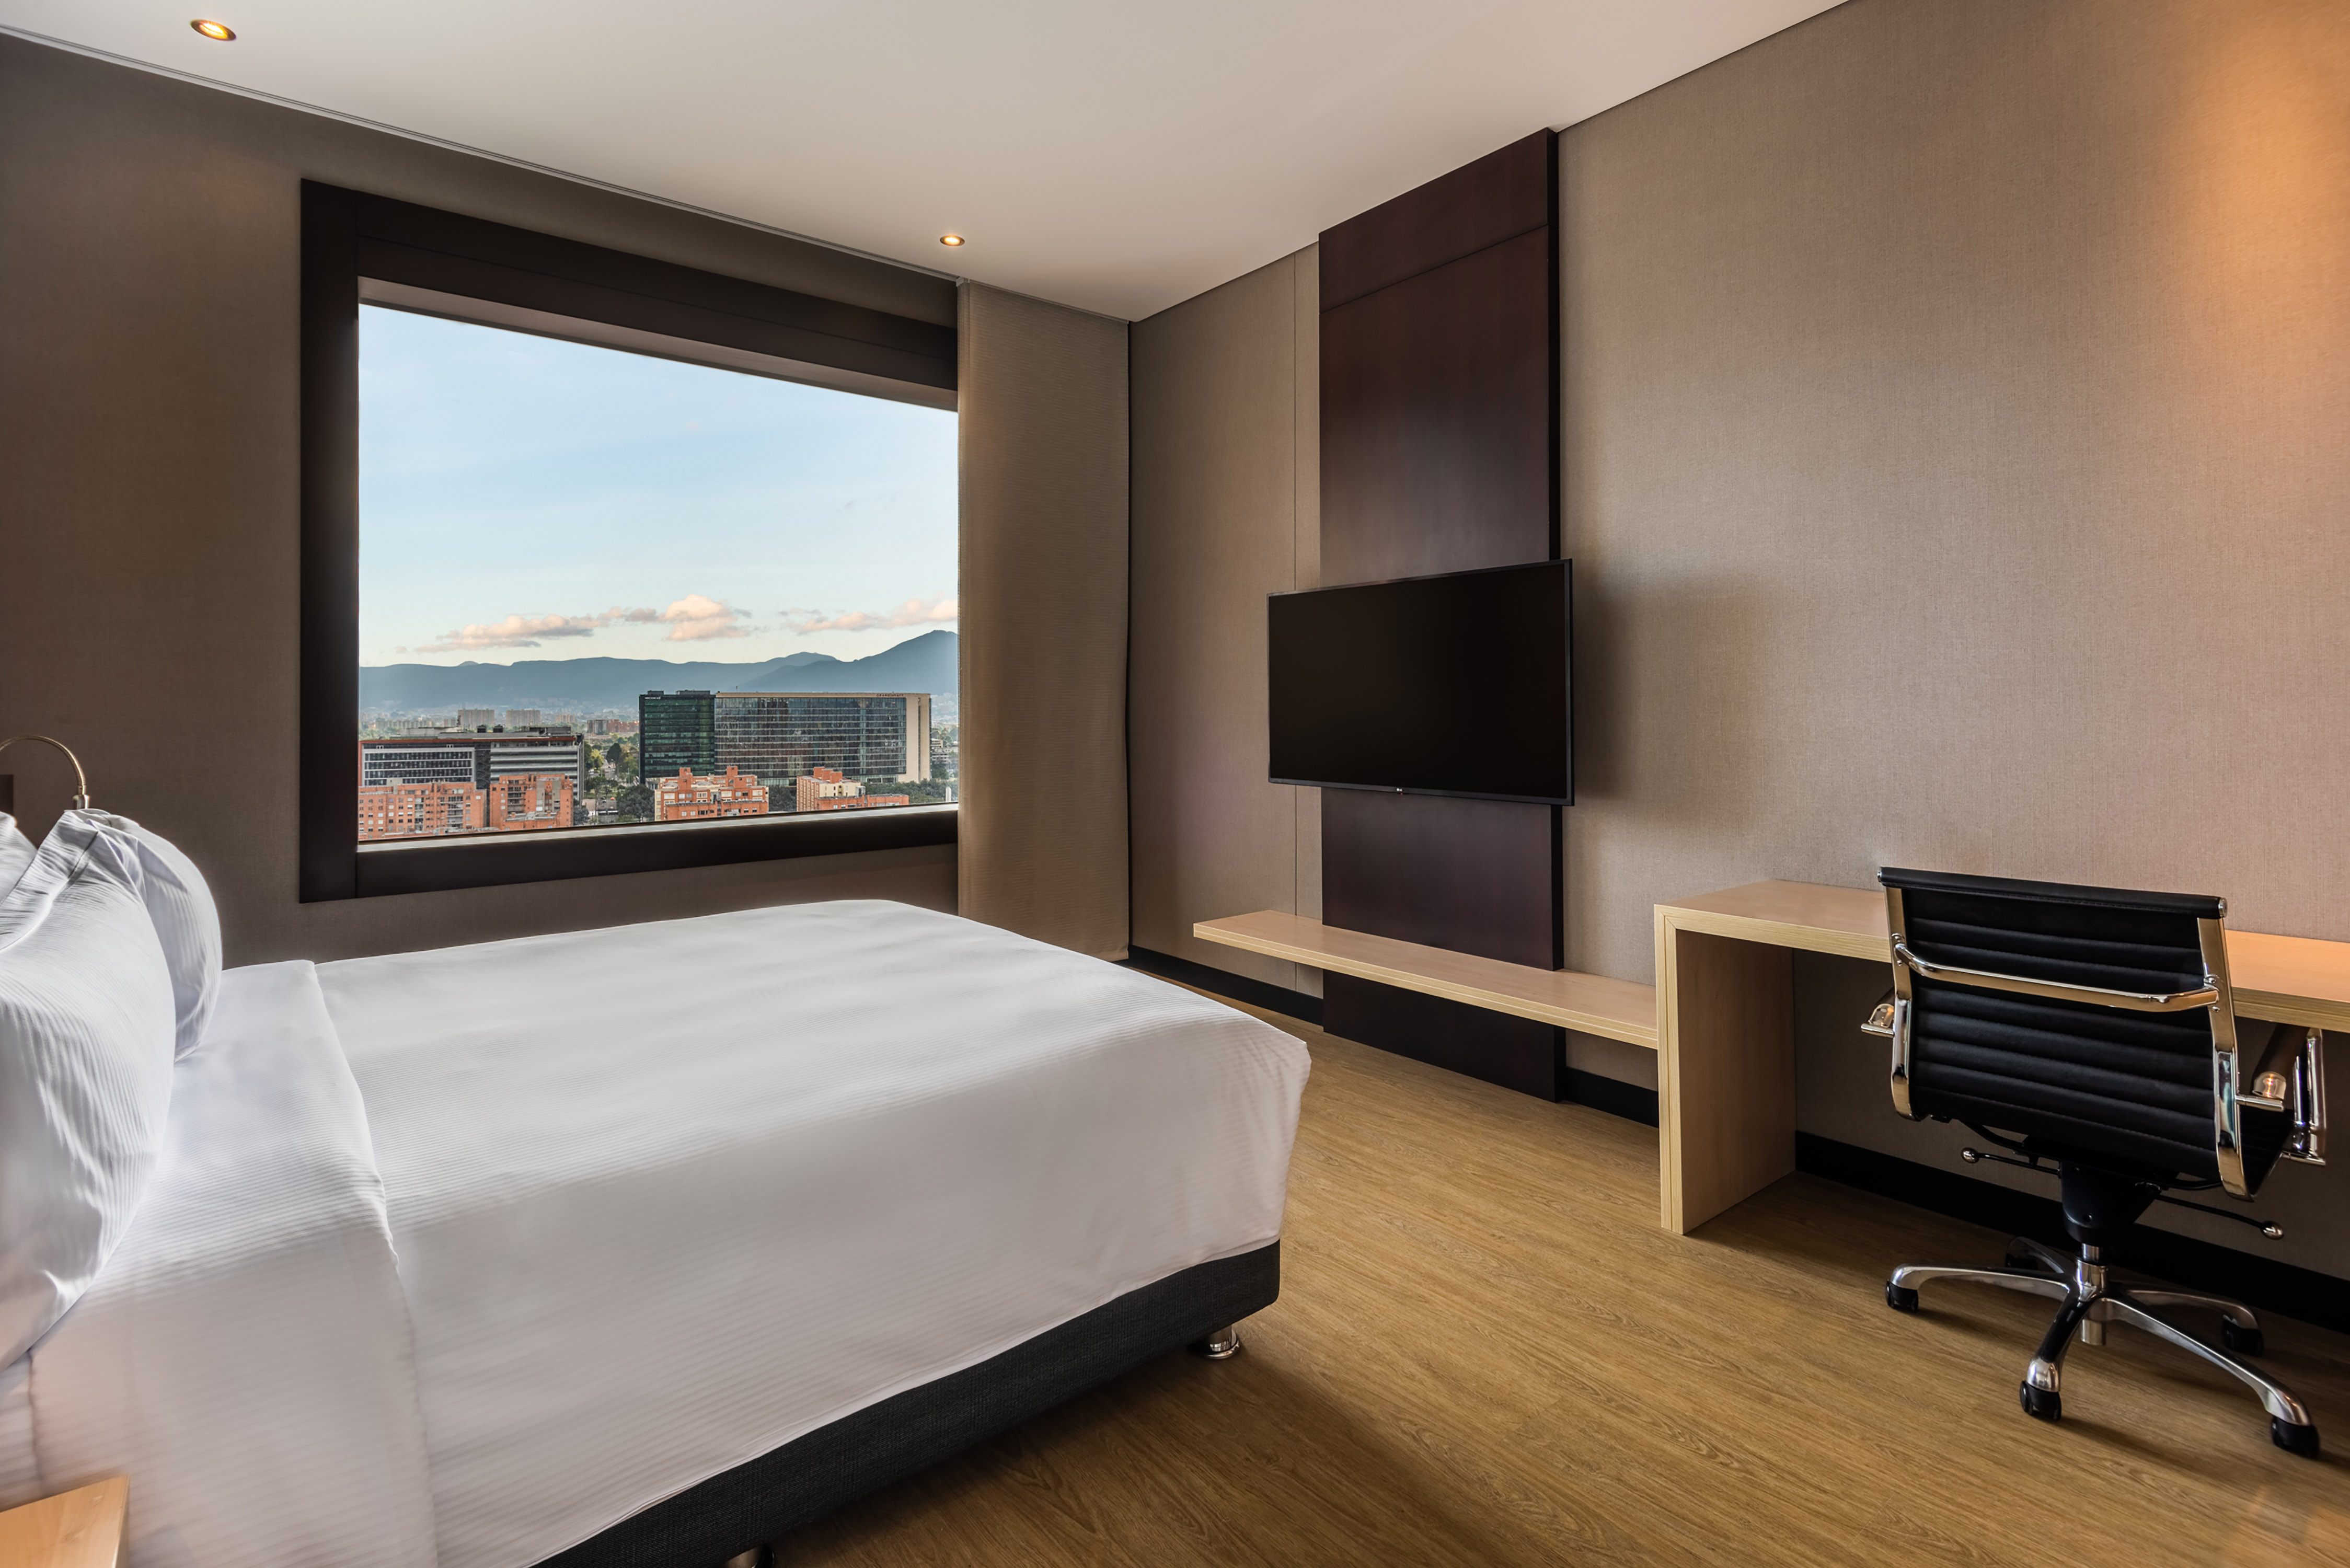 Bed in Guest Room with Desk HDTV and City View